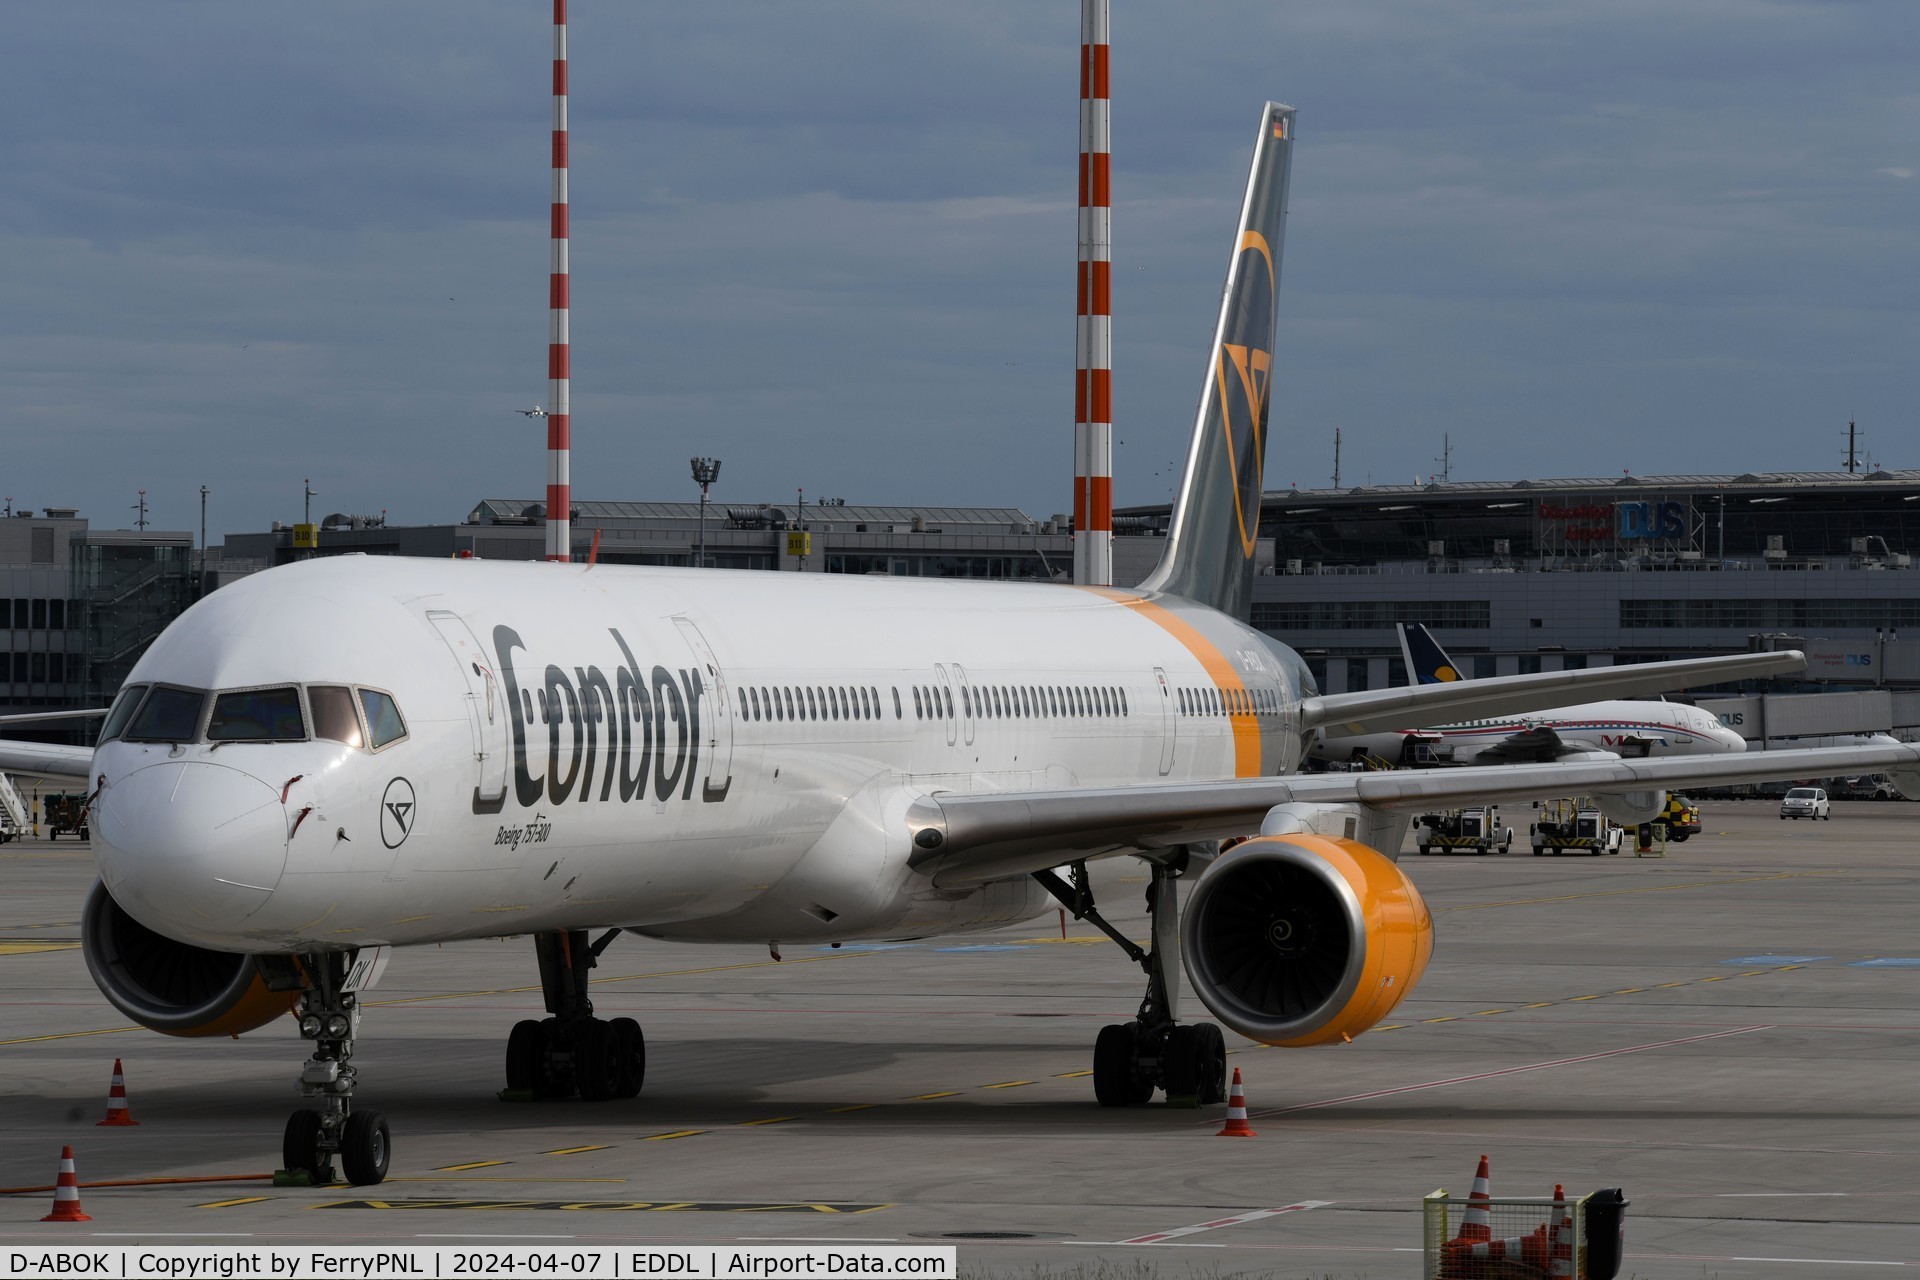 D-ABOK, 2000 Boeing 757-330 C/N 29020, Condor B753 parked at DUS